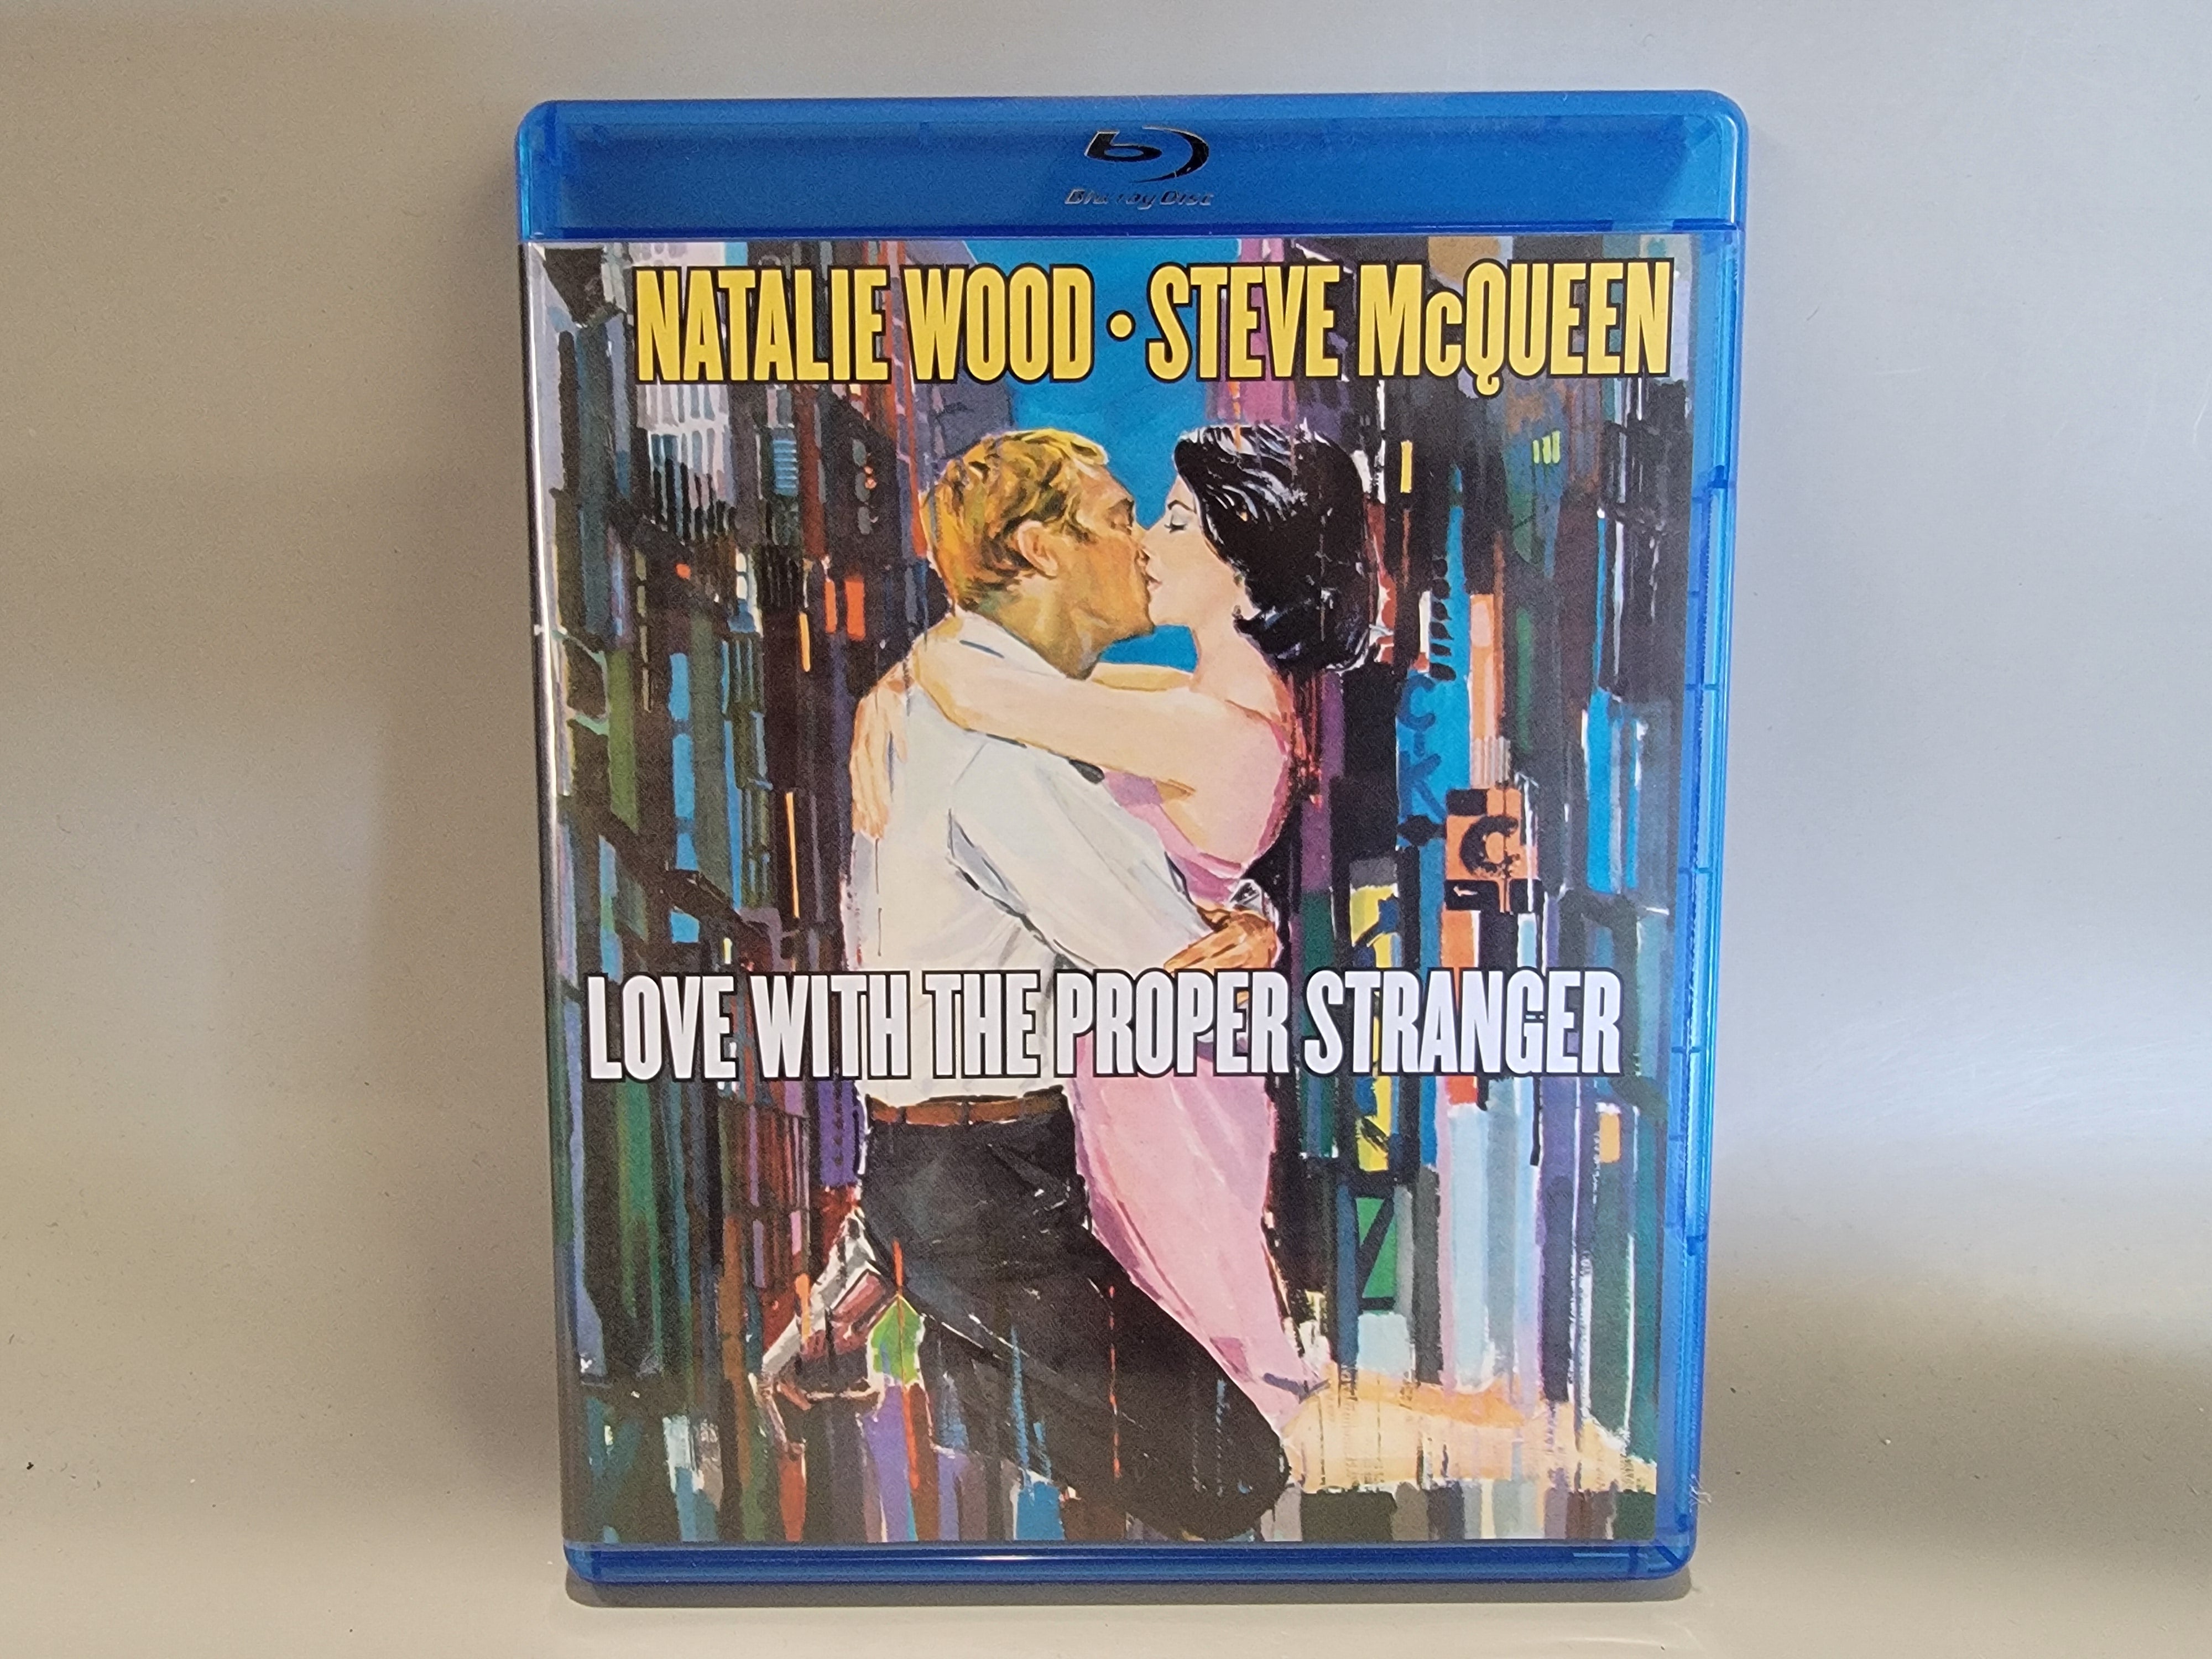 LOVE WITH THE PROPER STRANGER BLU-RAY [USED]